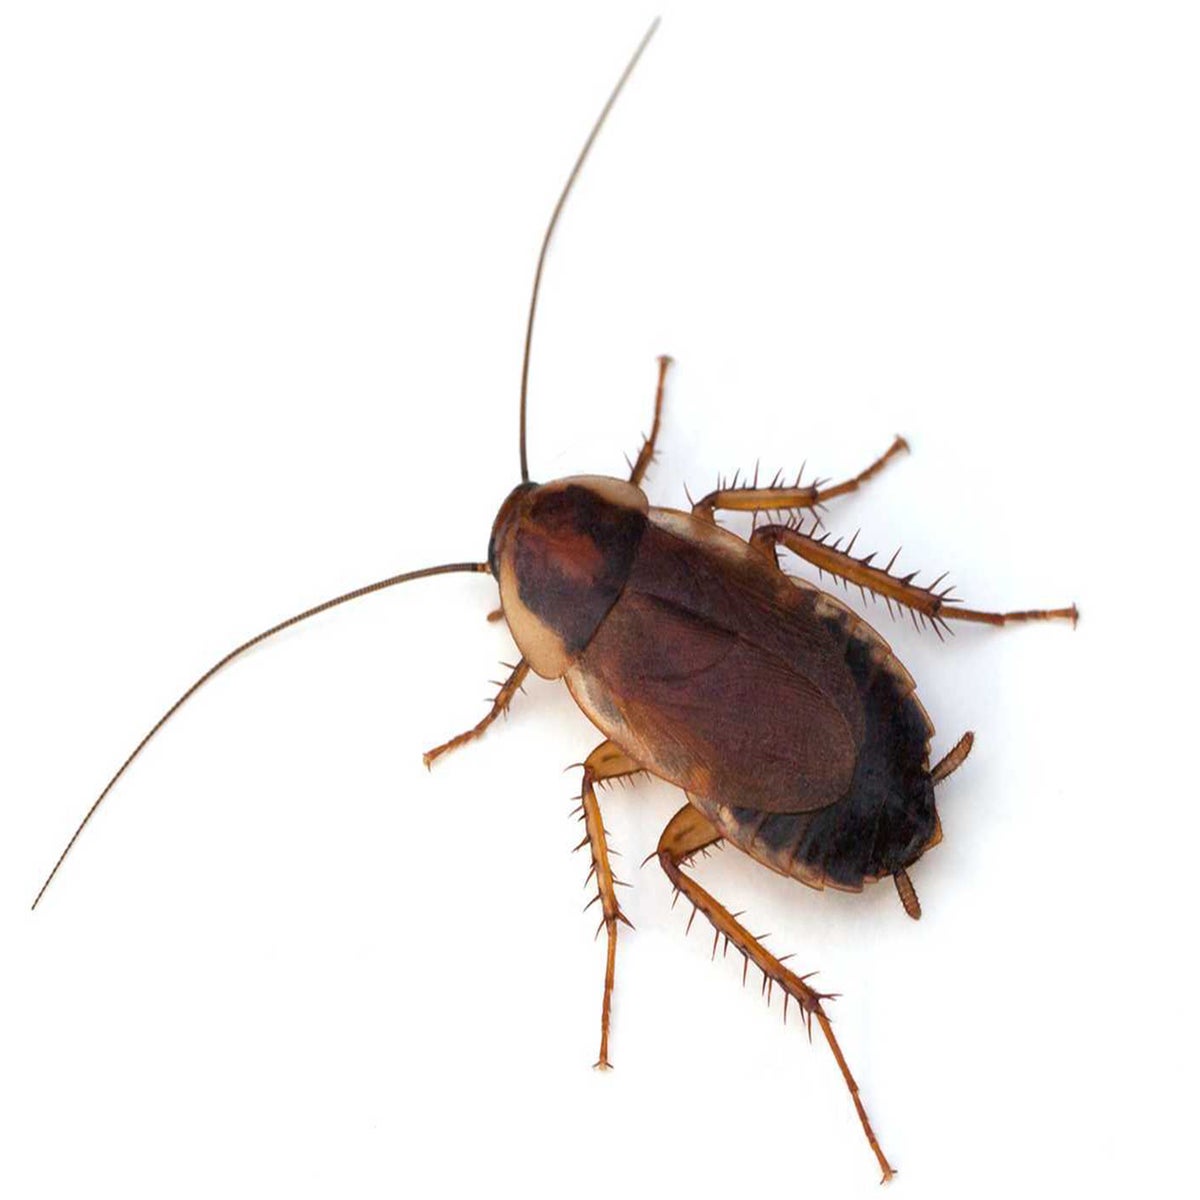 Real Tamil Insects Sex Videos - Doctors find live cockroach in woman's skull after she reports experiencing  'crawling sensation' | The Independent | The Independent